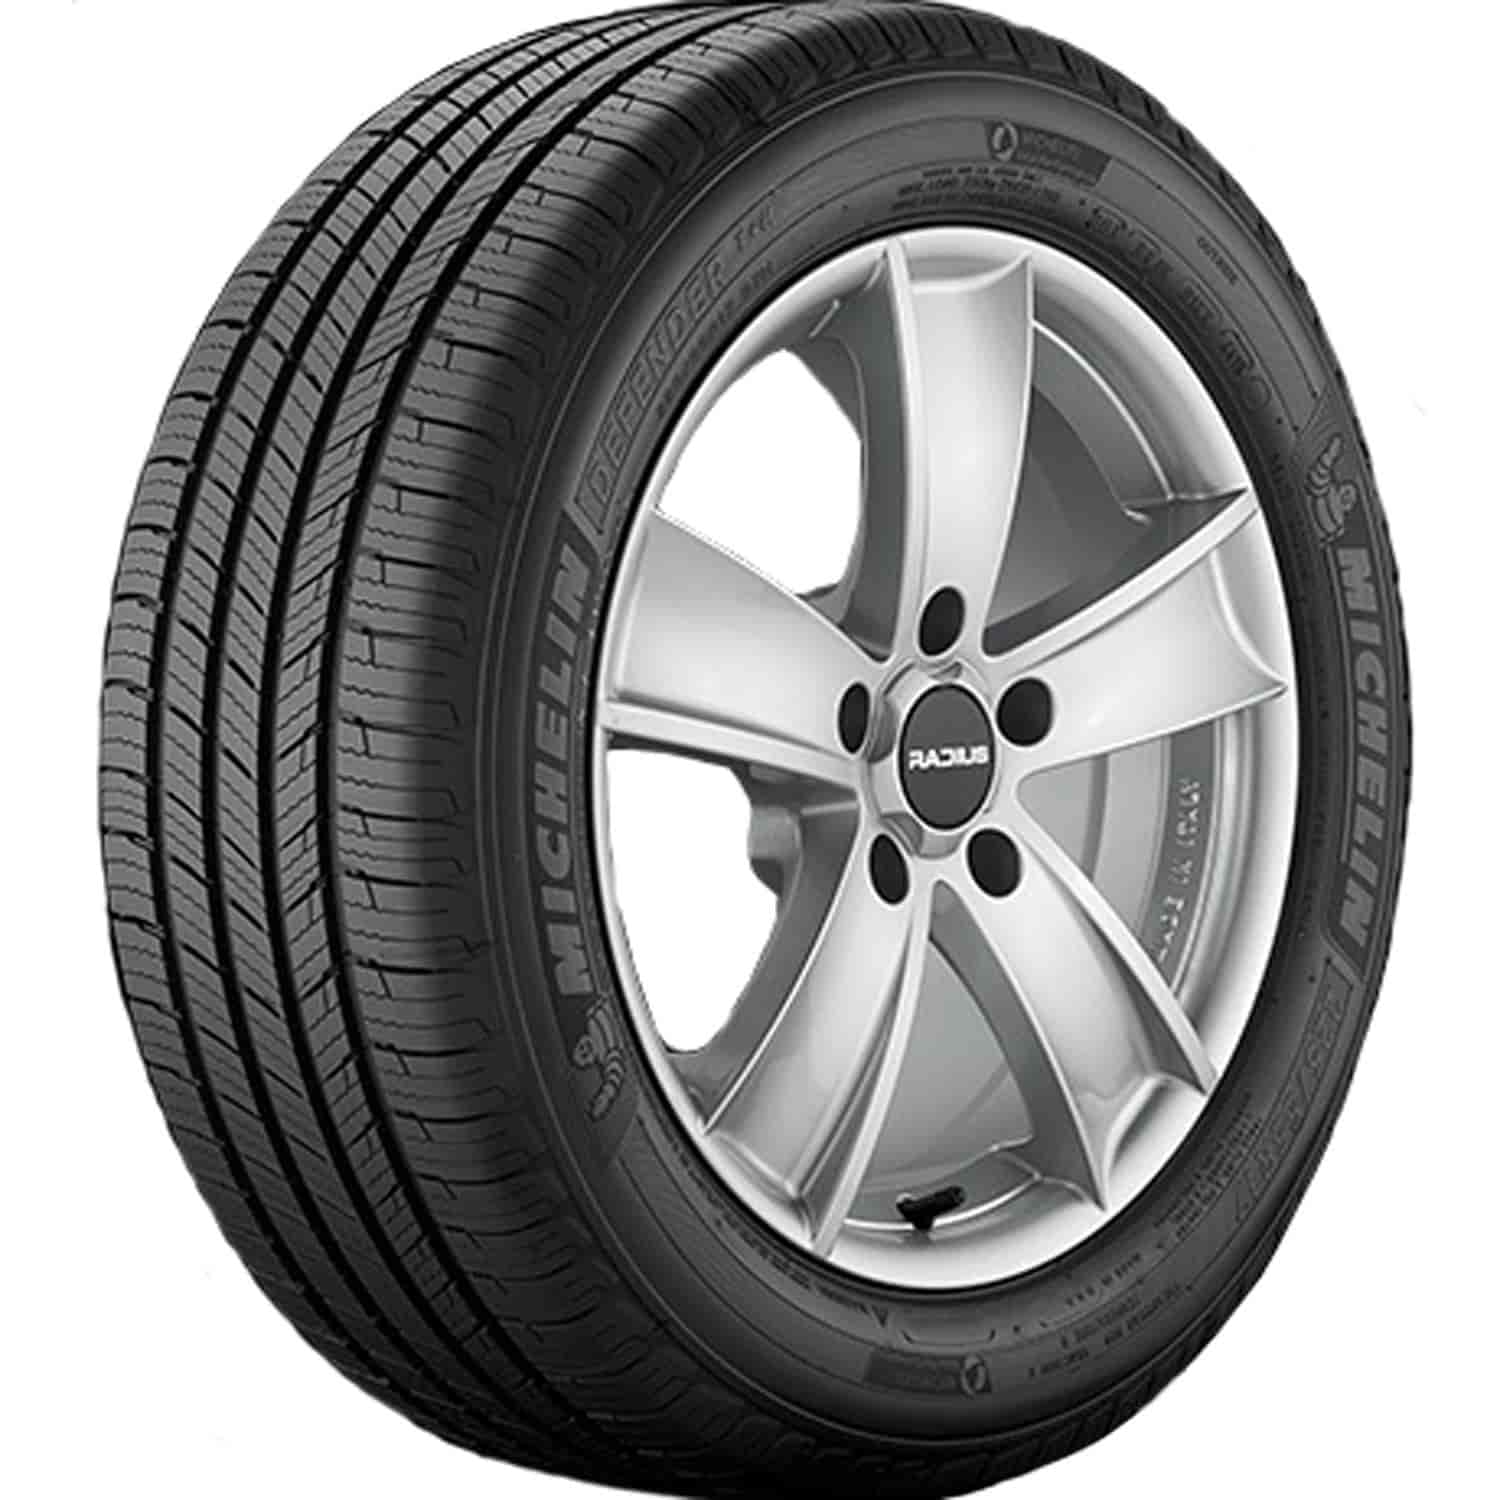 Defender T+H Tire Size:215/55R18